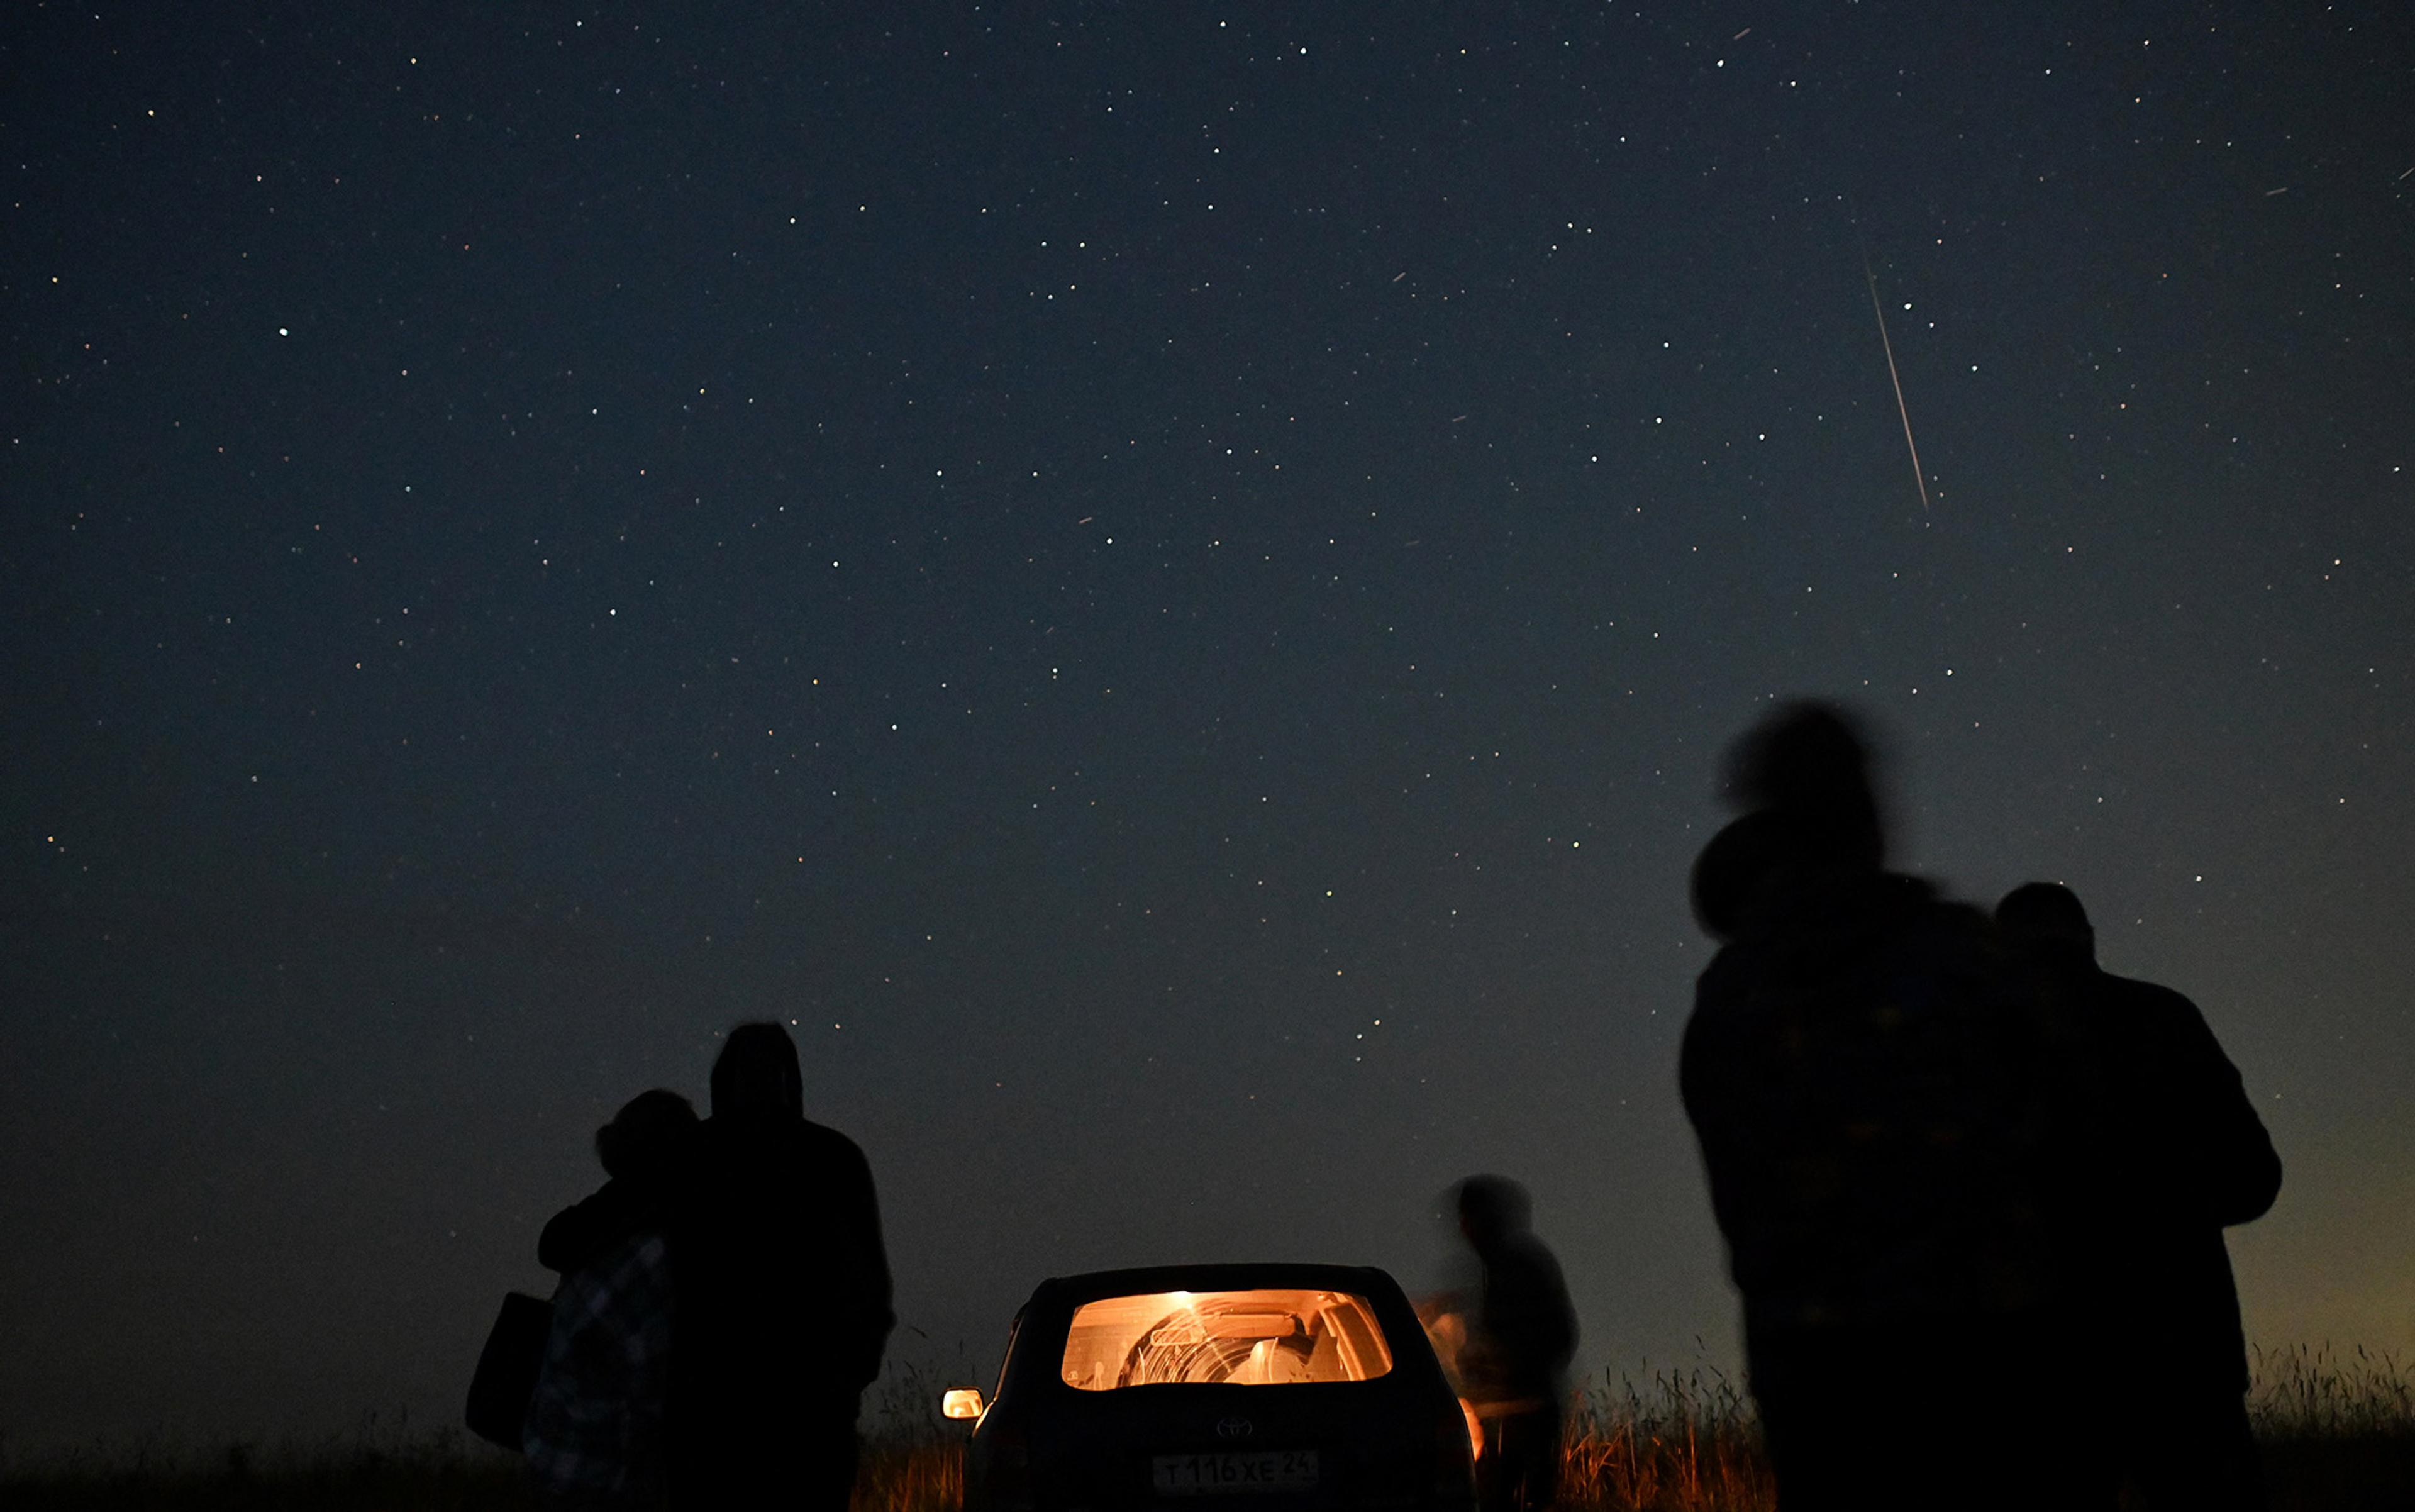 Silhouetted figures stand beside a car looking up at a starry night sky